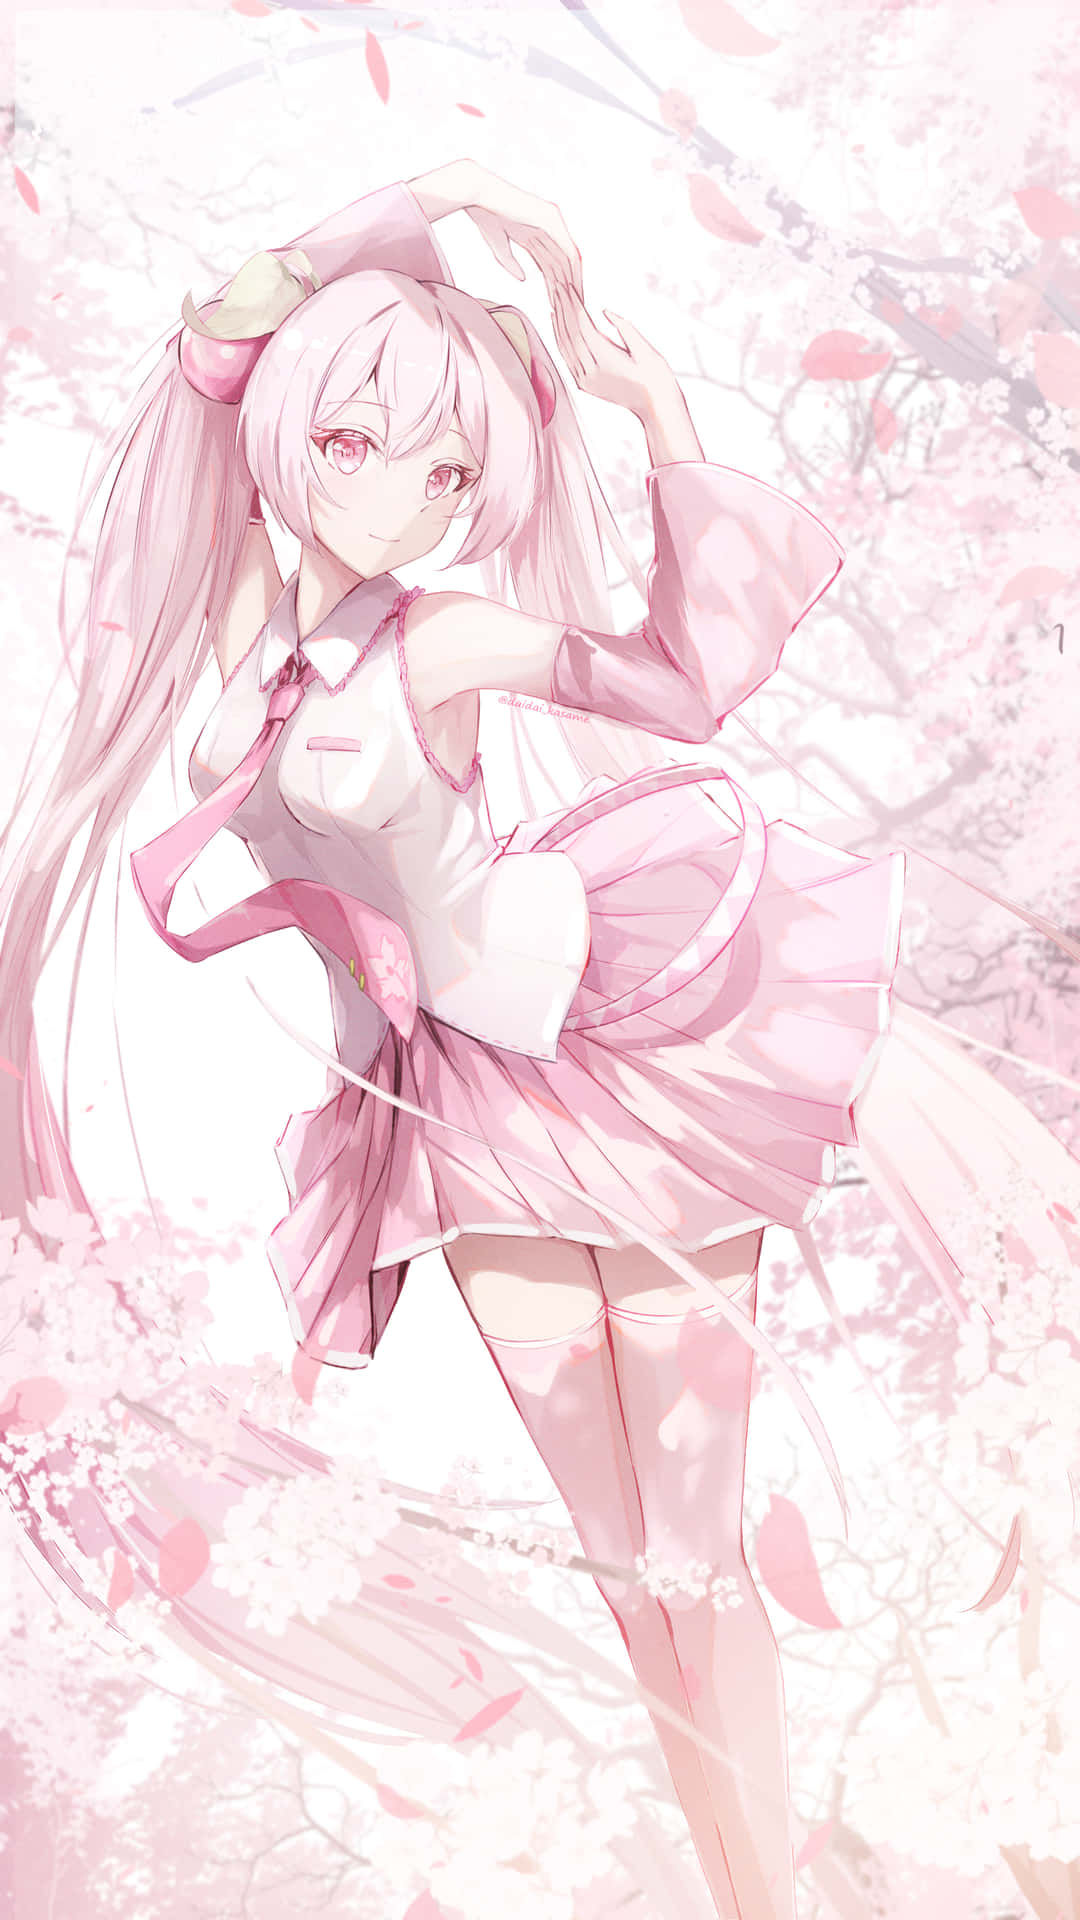 A dreamy pink landscape with Sakura Miku standing in the center Wallpaper